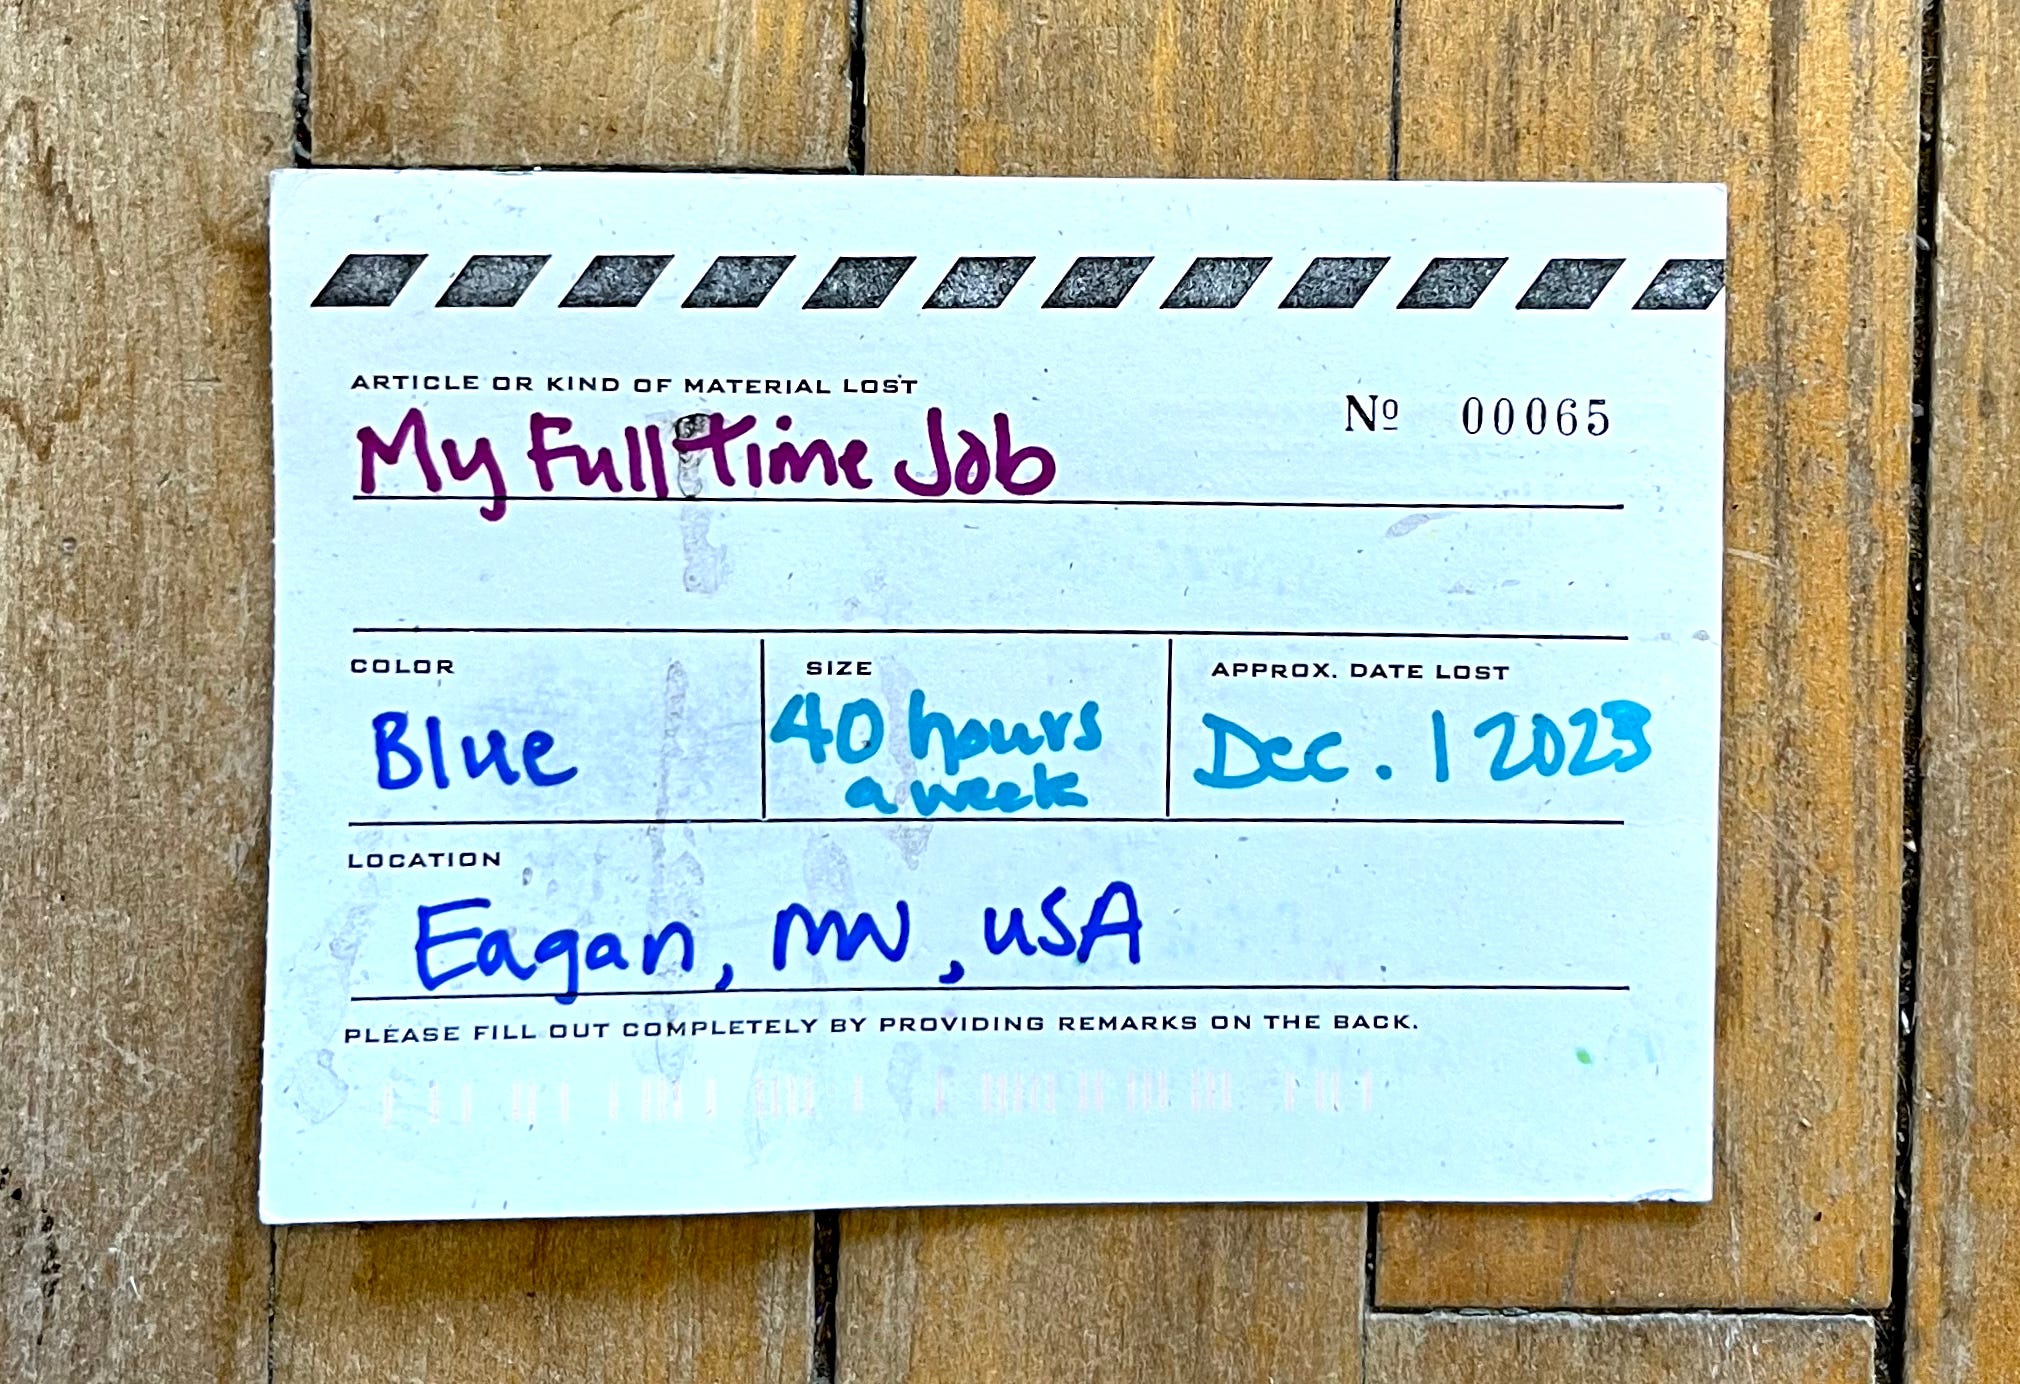 A black and white postcard designed to look like a lost article tag. It is numbered 00065. Under article or kind of material lost it says in handwriting "My full time job". Color: Blue. Size: 40 hours a week. Approx. Date Lost: Dec. 1 2023. Location: Eagan, MN, USA